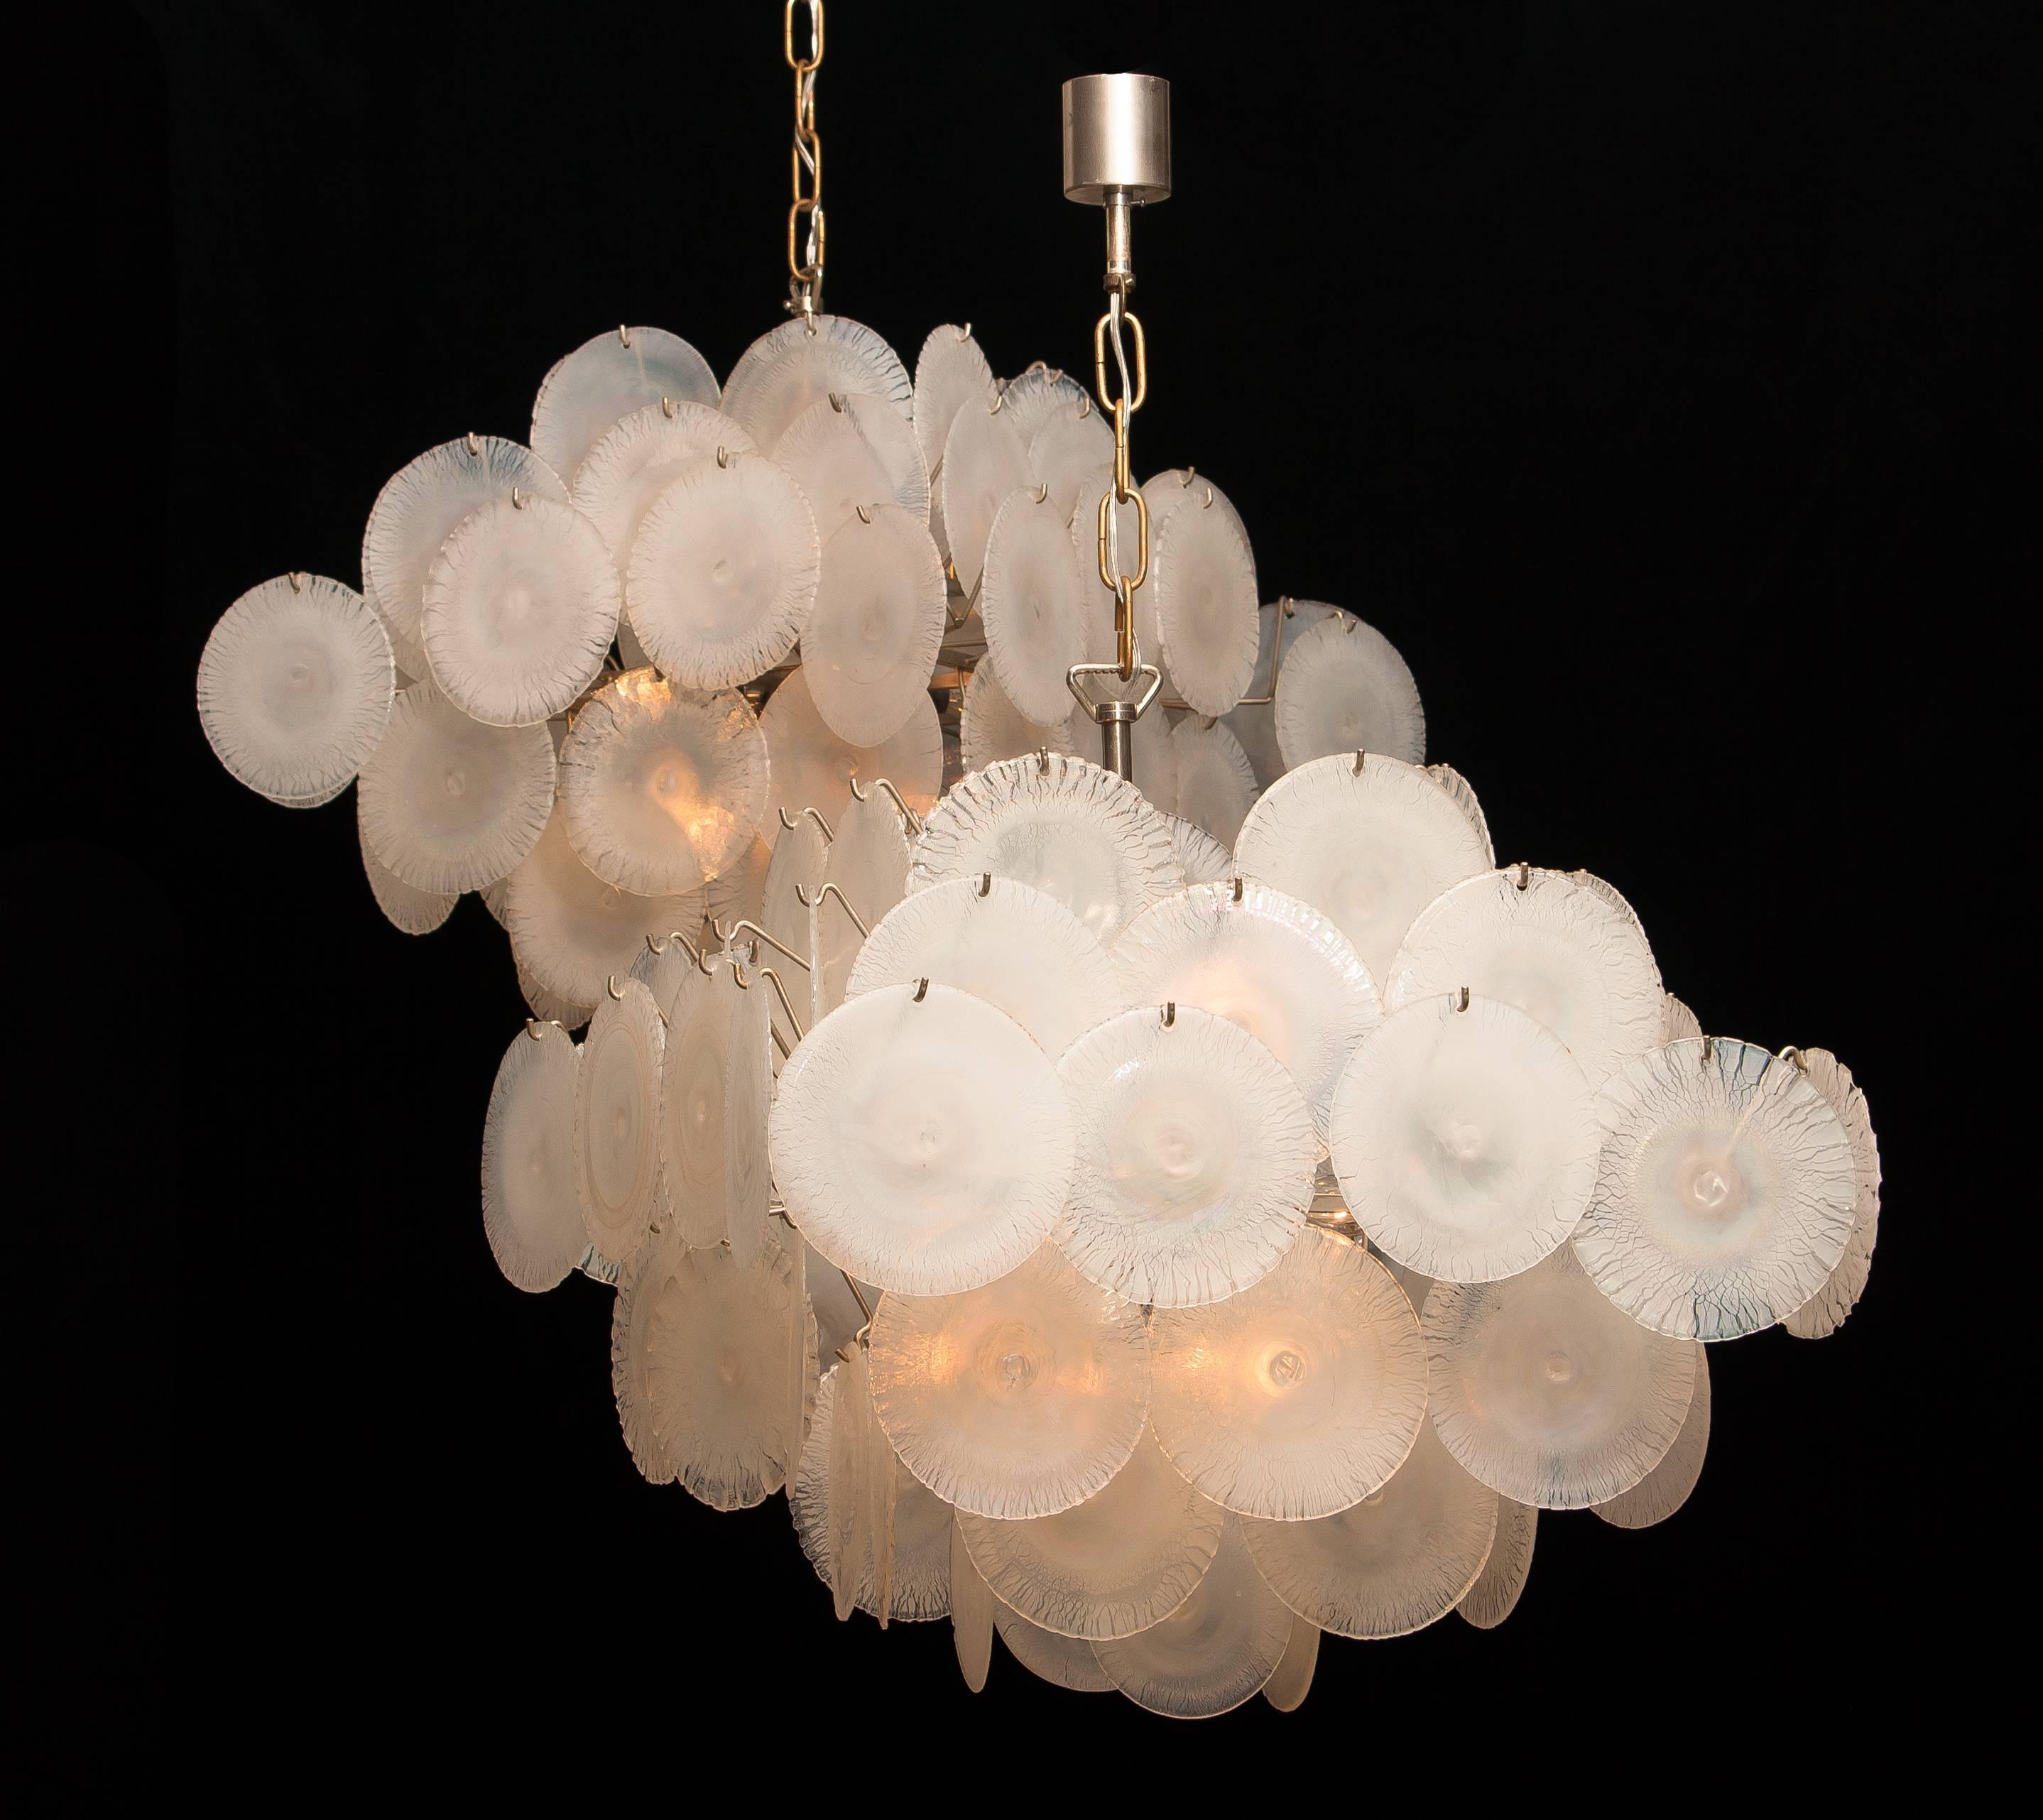 Extremely beautiful set of two Gino Vistosi chandeliers with white/pearl colored handmade Murano crystal discs. 

These Gino Vistosi chandeliers are made in Italy in the 1960s. The chandeliers contain 60 Murano white/pearl coloured crystal discs